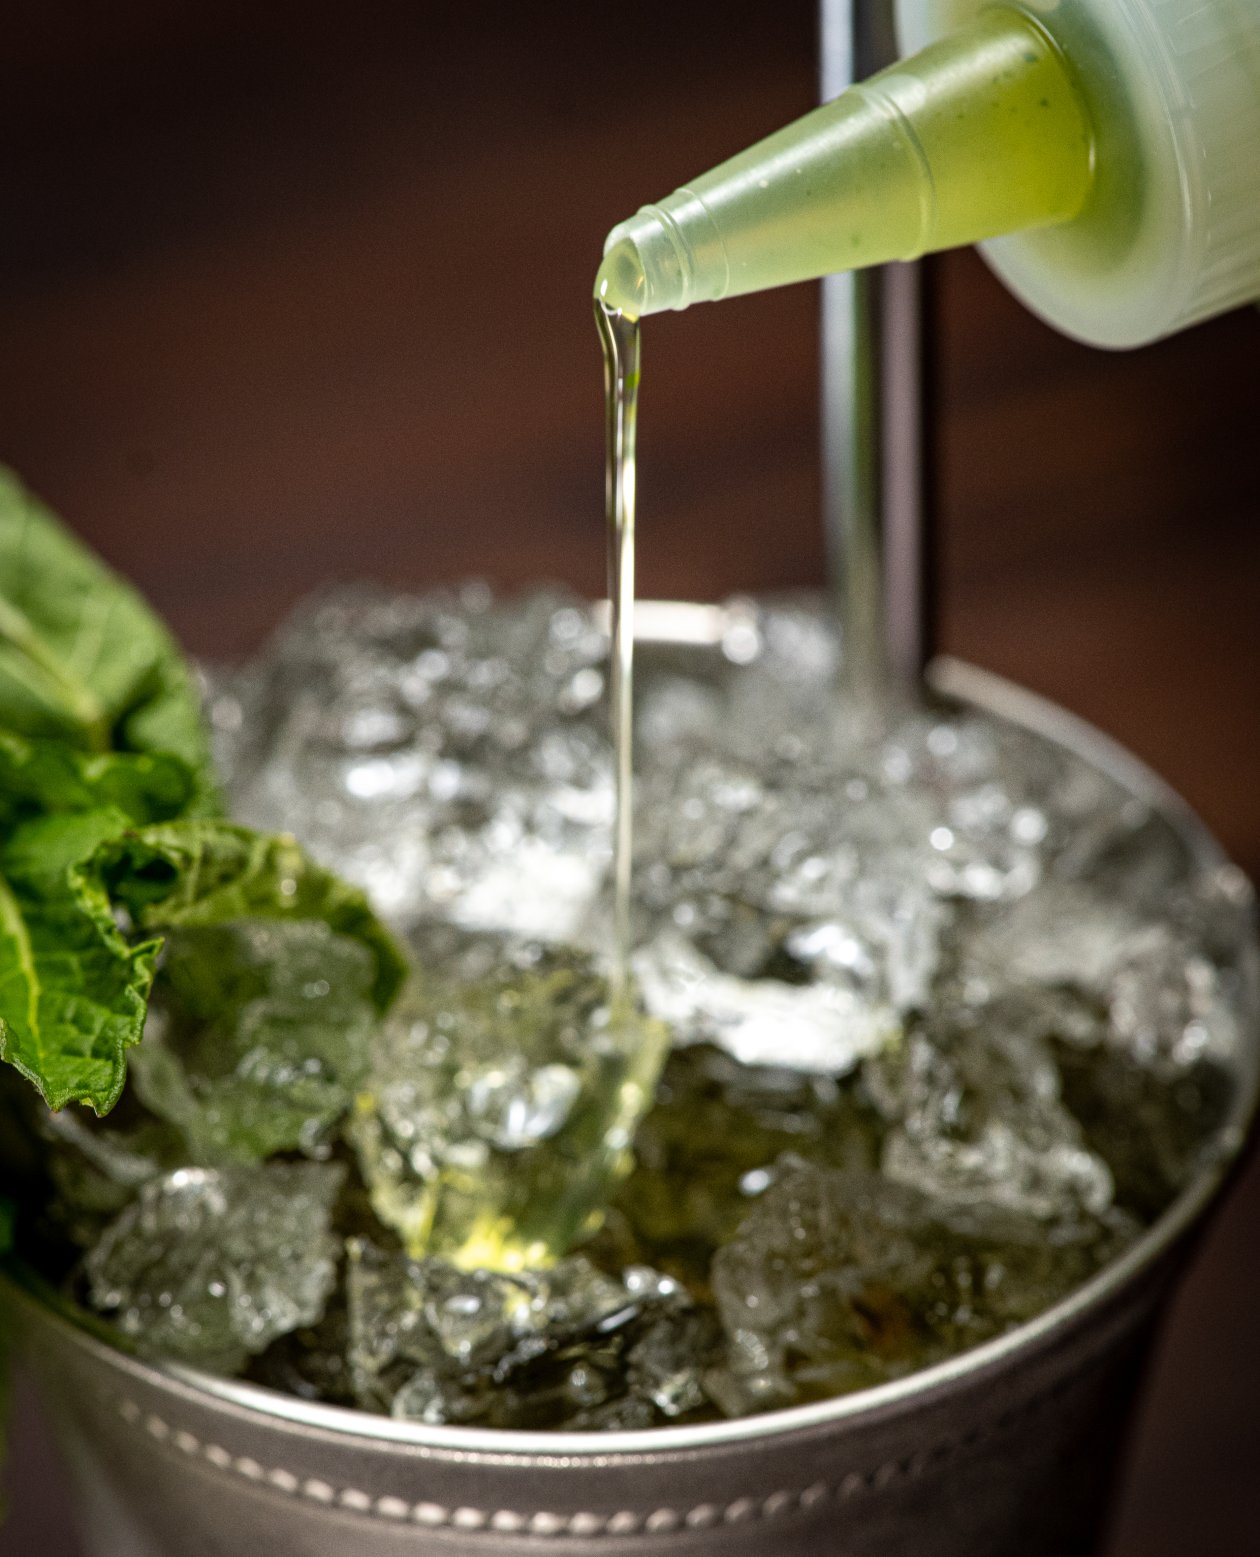 Simple mint syrup in a squeeze bottle drizzled into a mint julep cup filled with crushed ice and garnished with a mint sprig.